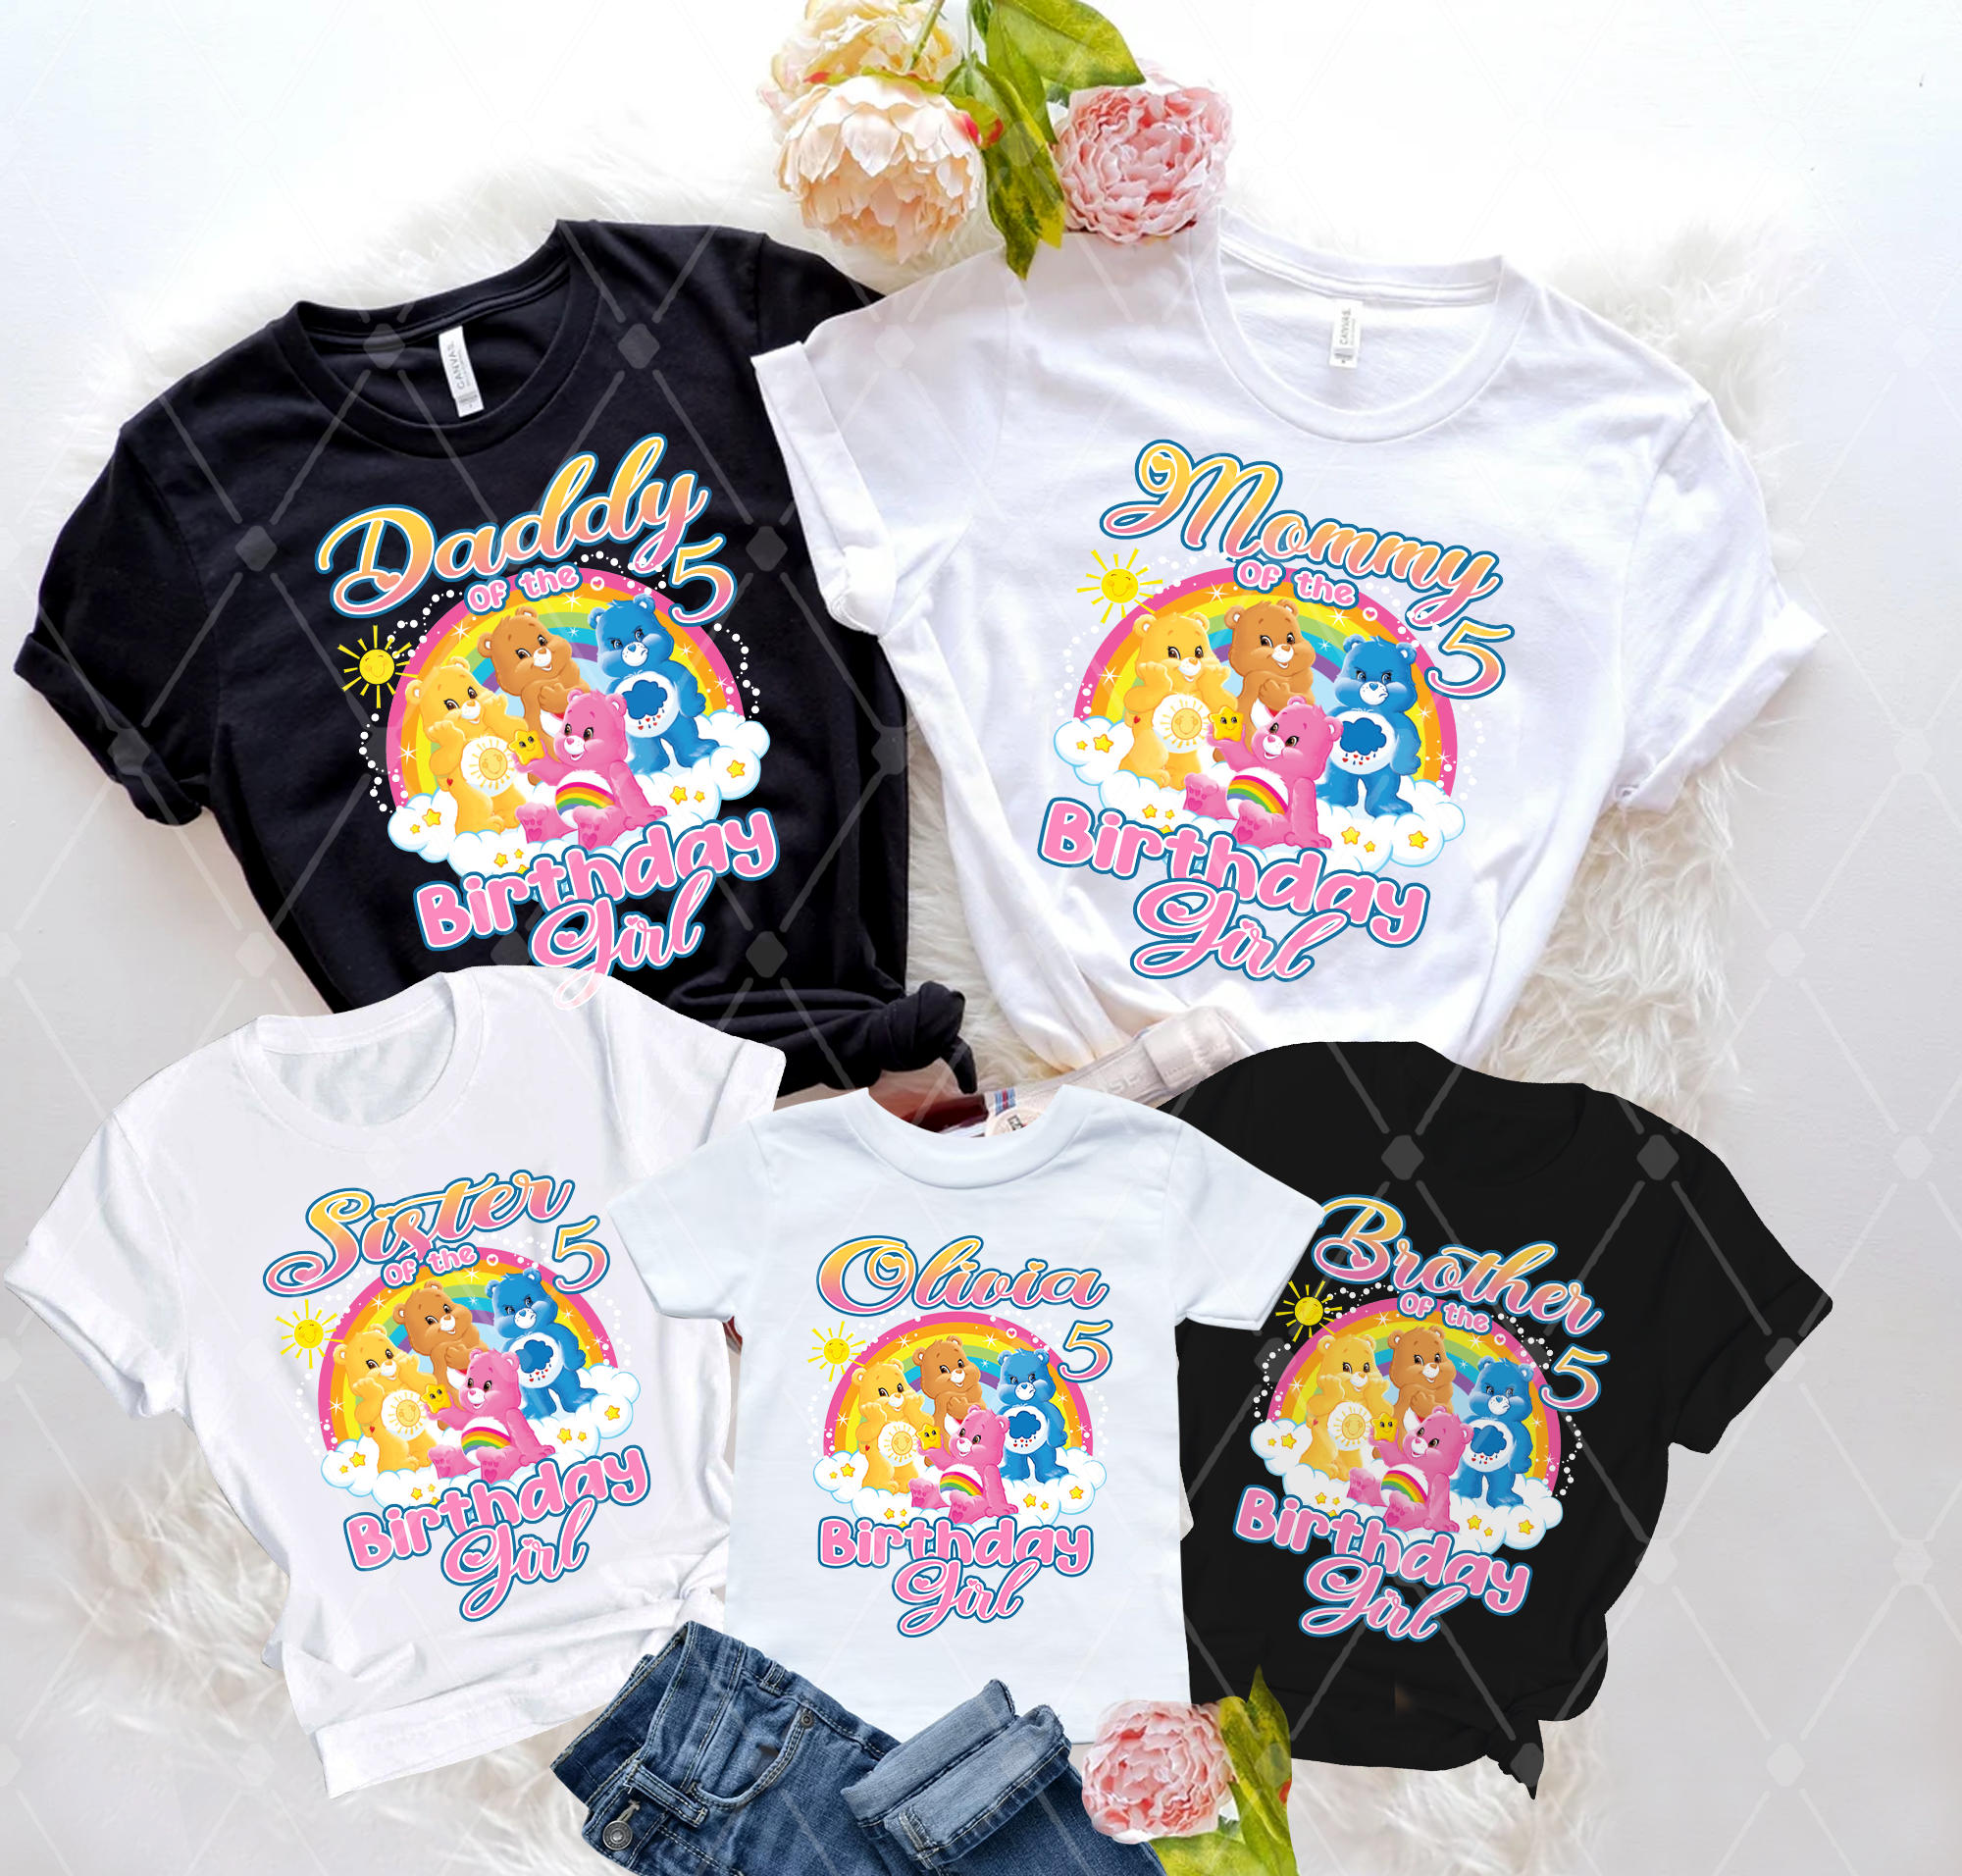 Personalized Care Bears Birthday Shirt, Care Bears Family Matching Shirt, Bears Party Shirt for Care Groups, Care Bears Tee